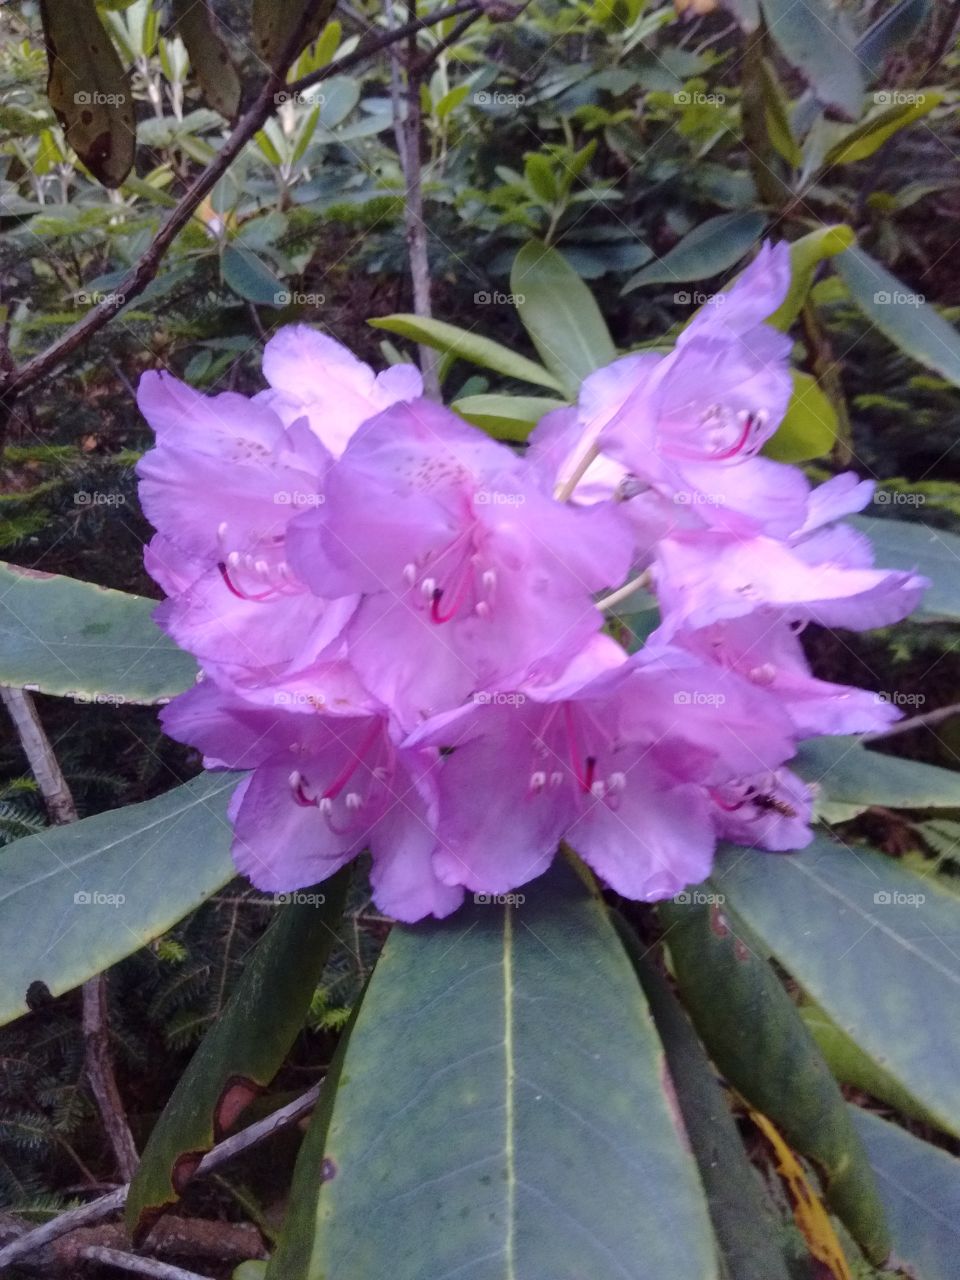 Catawba rhododendron flowering on Roan high knob 6200' ft